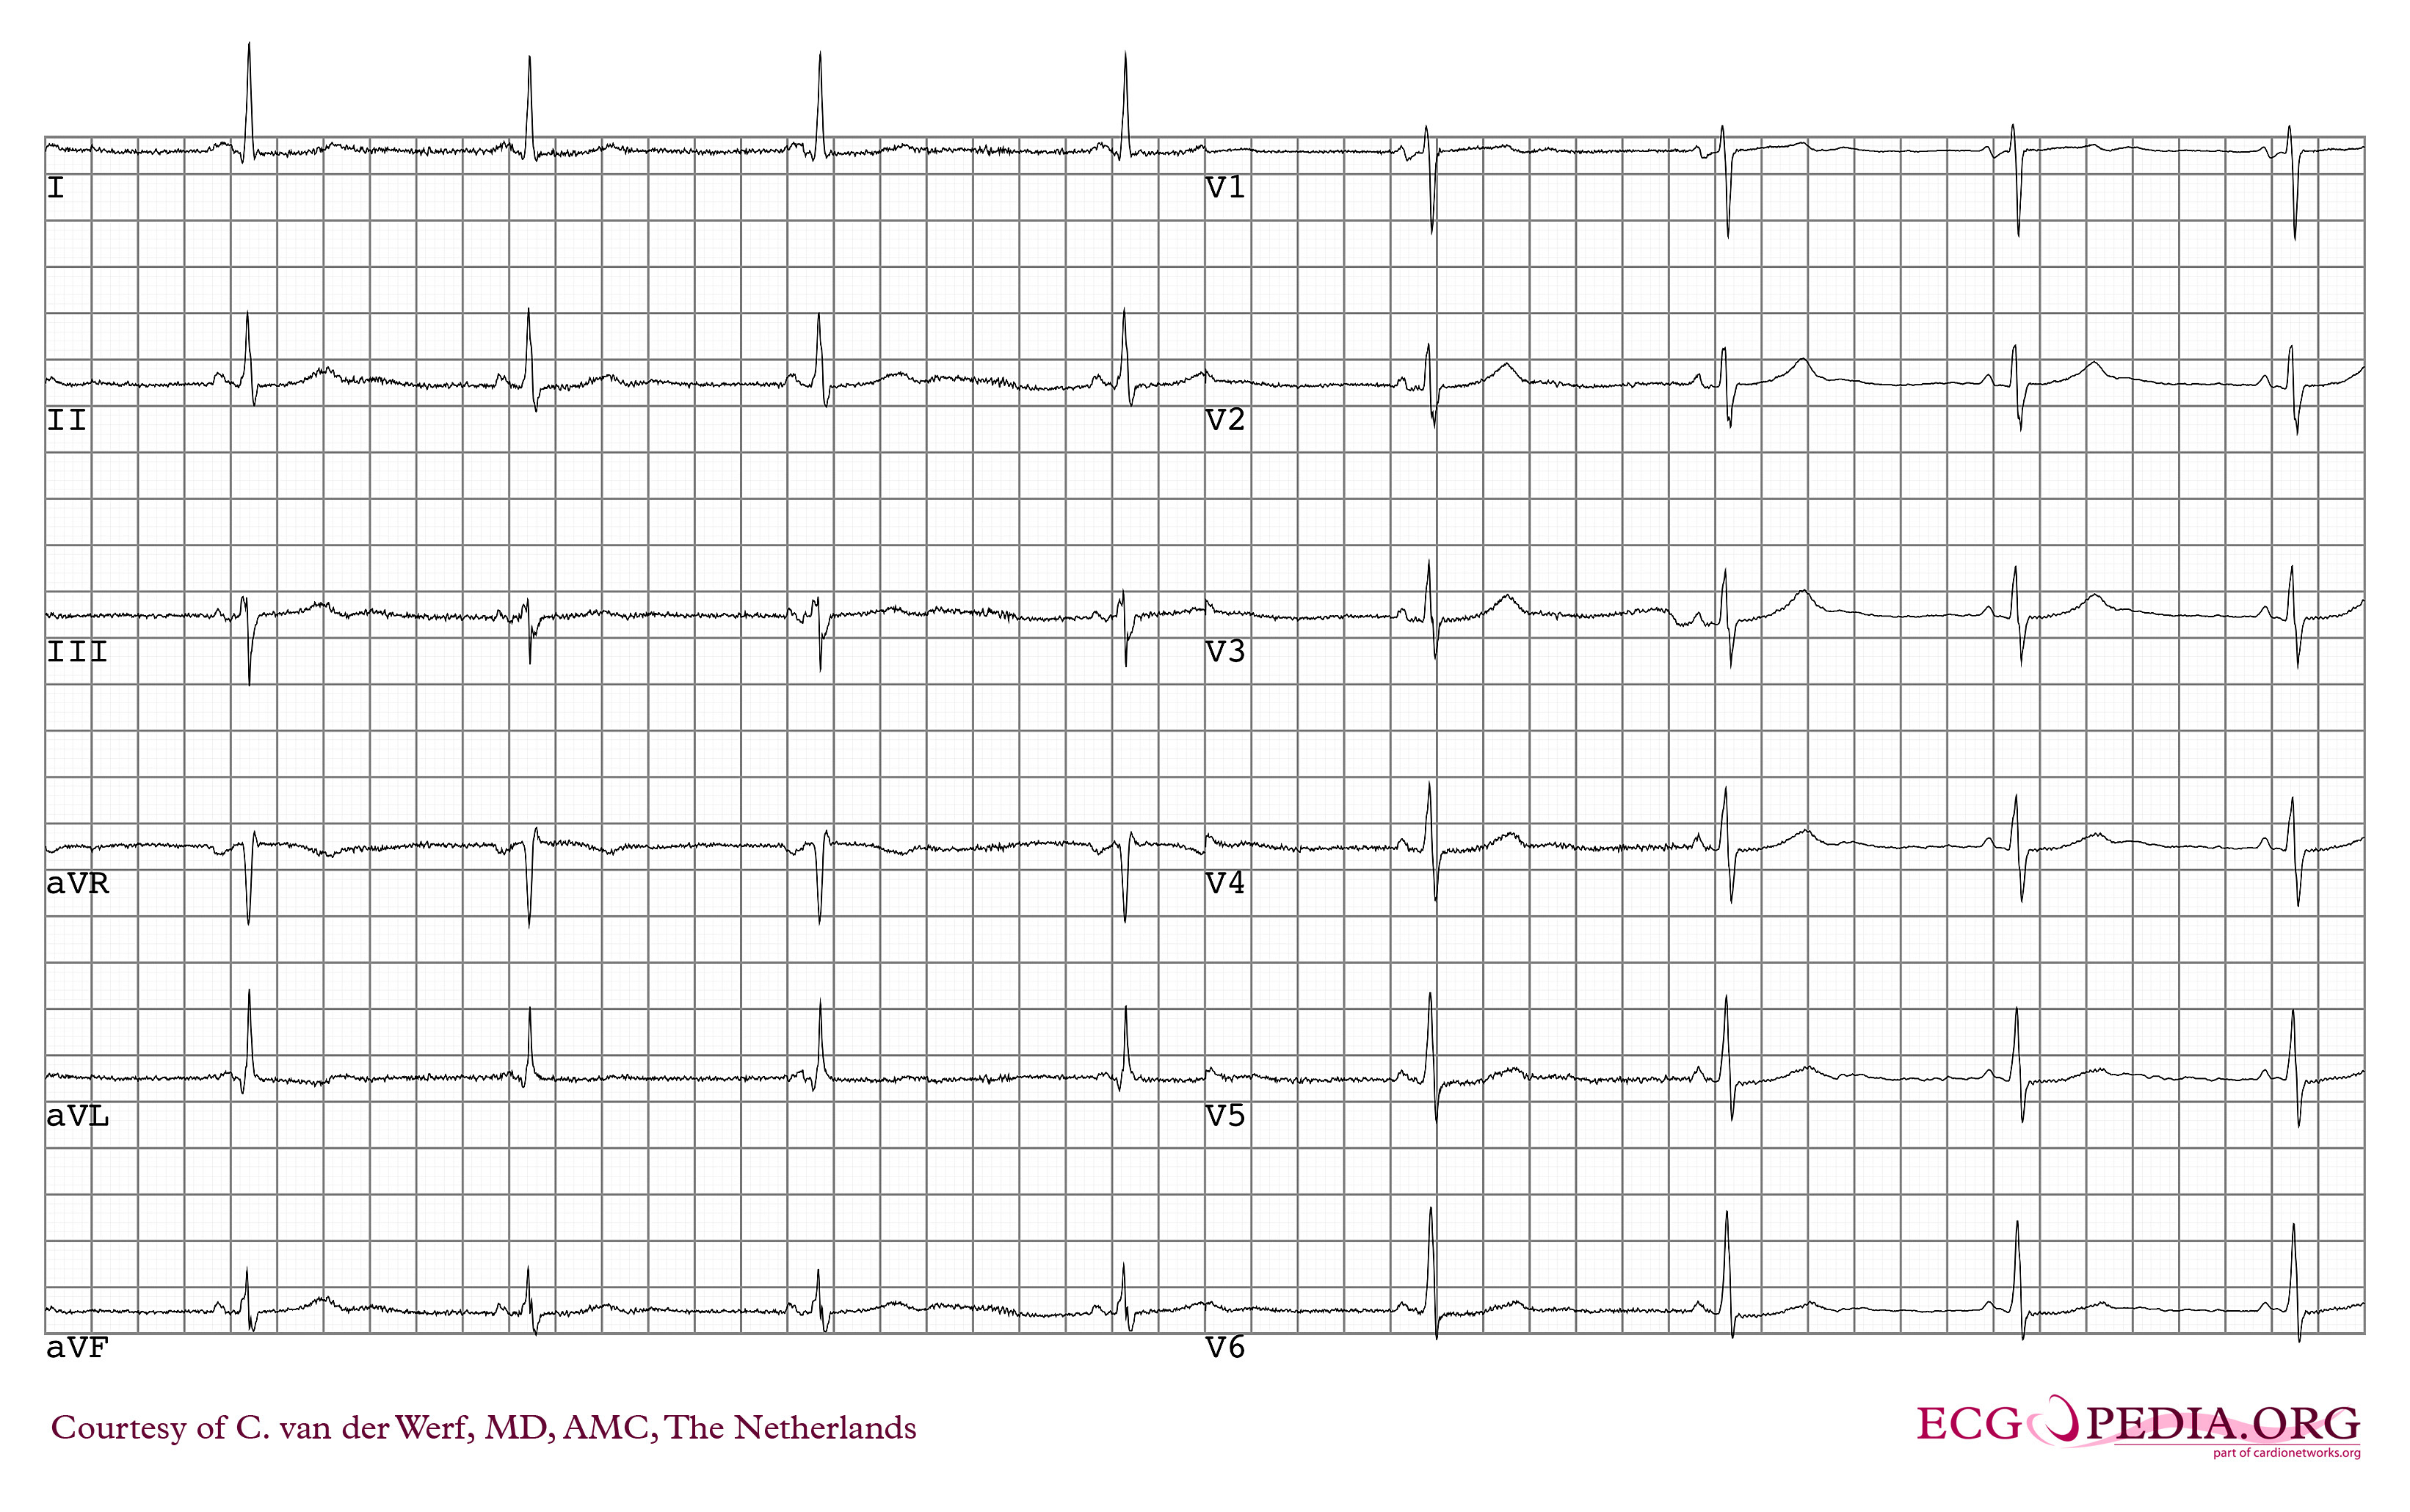 The ECG of a patient with CPVT in rest is normal